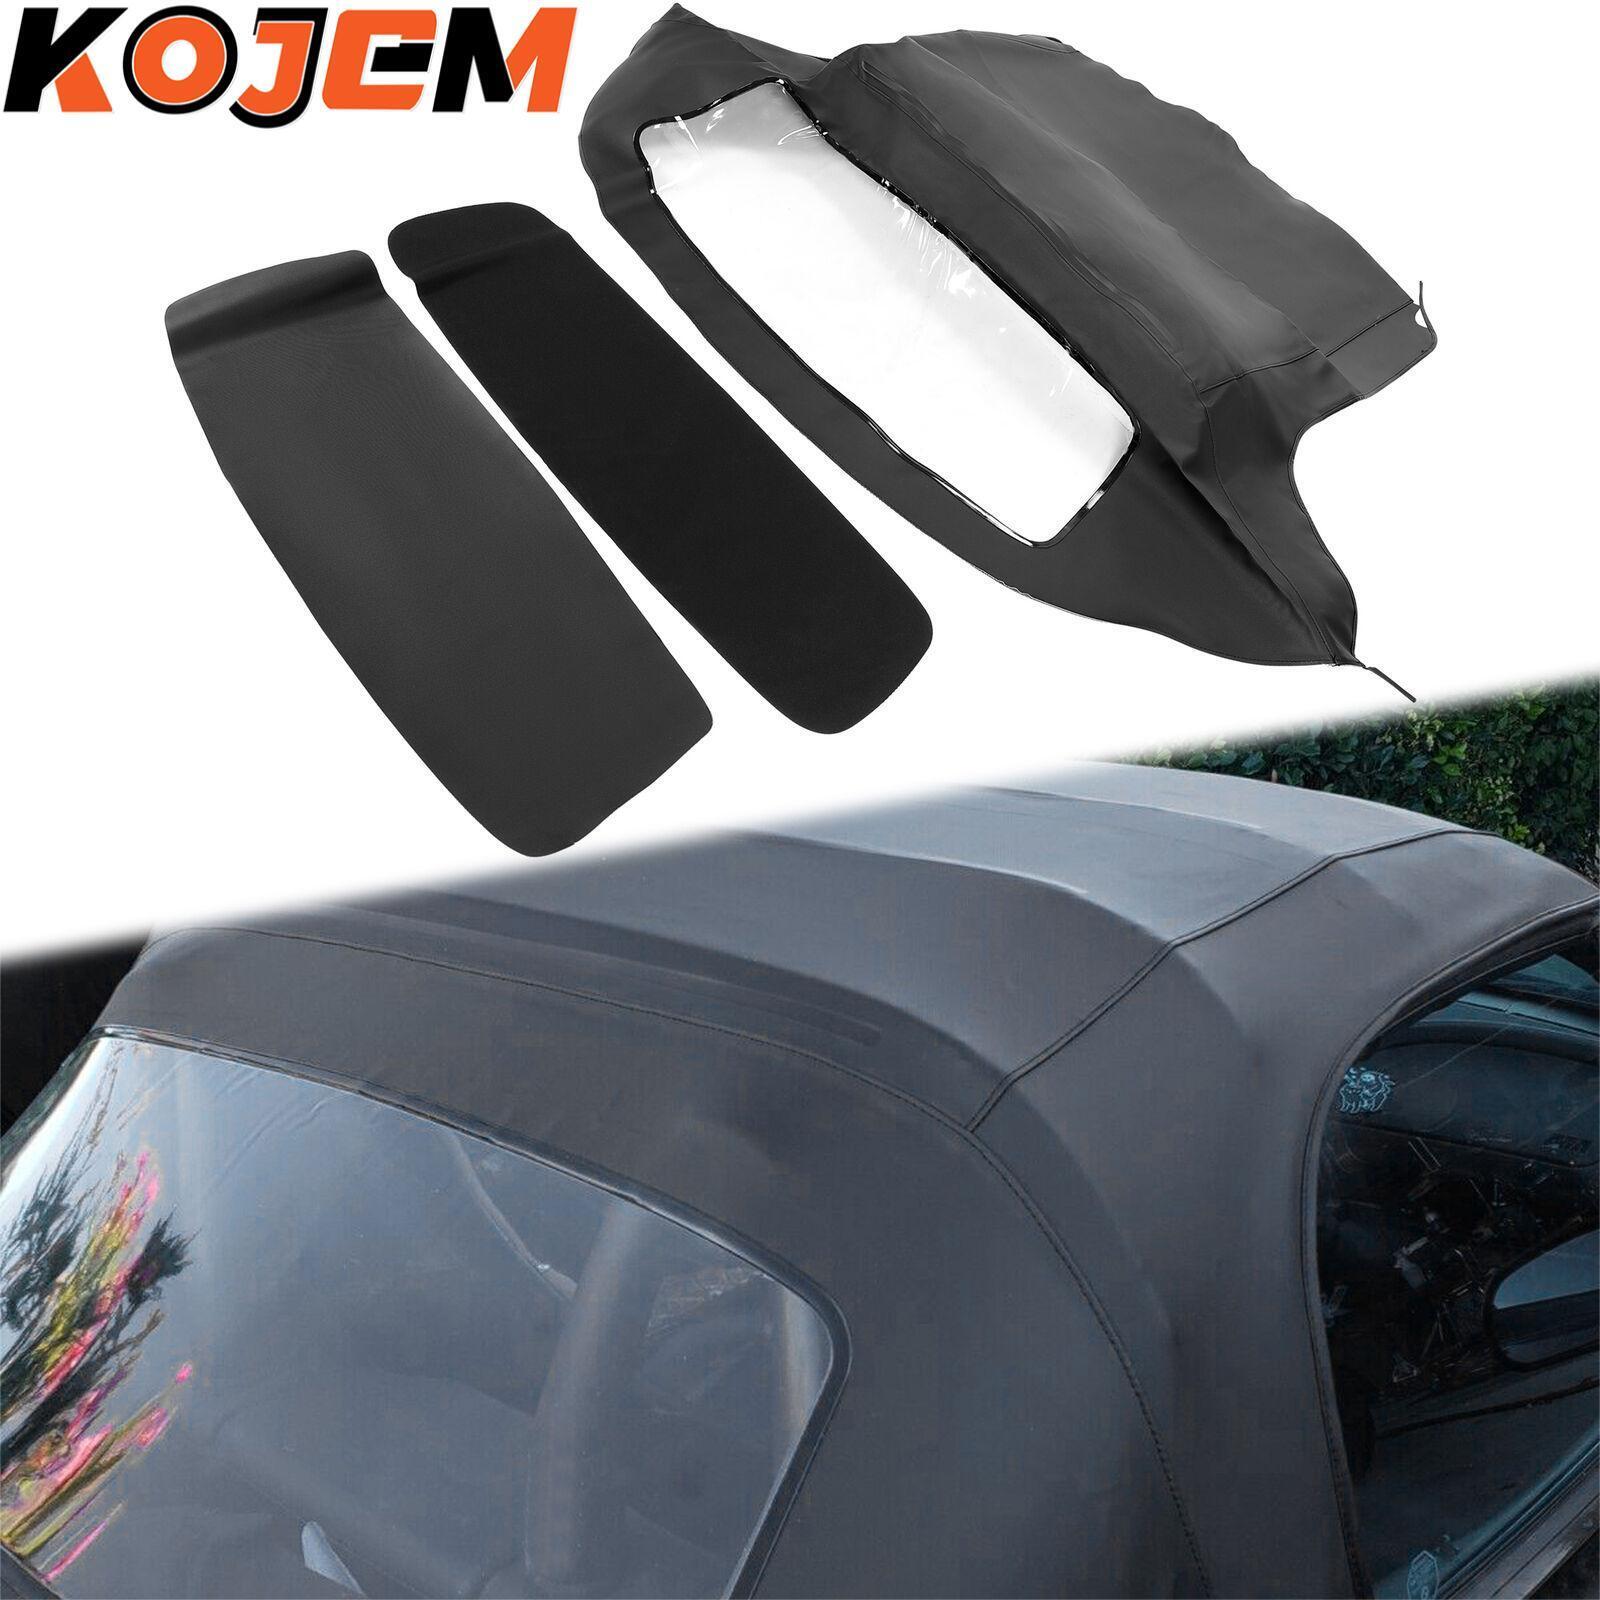 For BMW Z3 E36 96-02 Convertible Soft Top Replacement w/ Approved Plastic Window